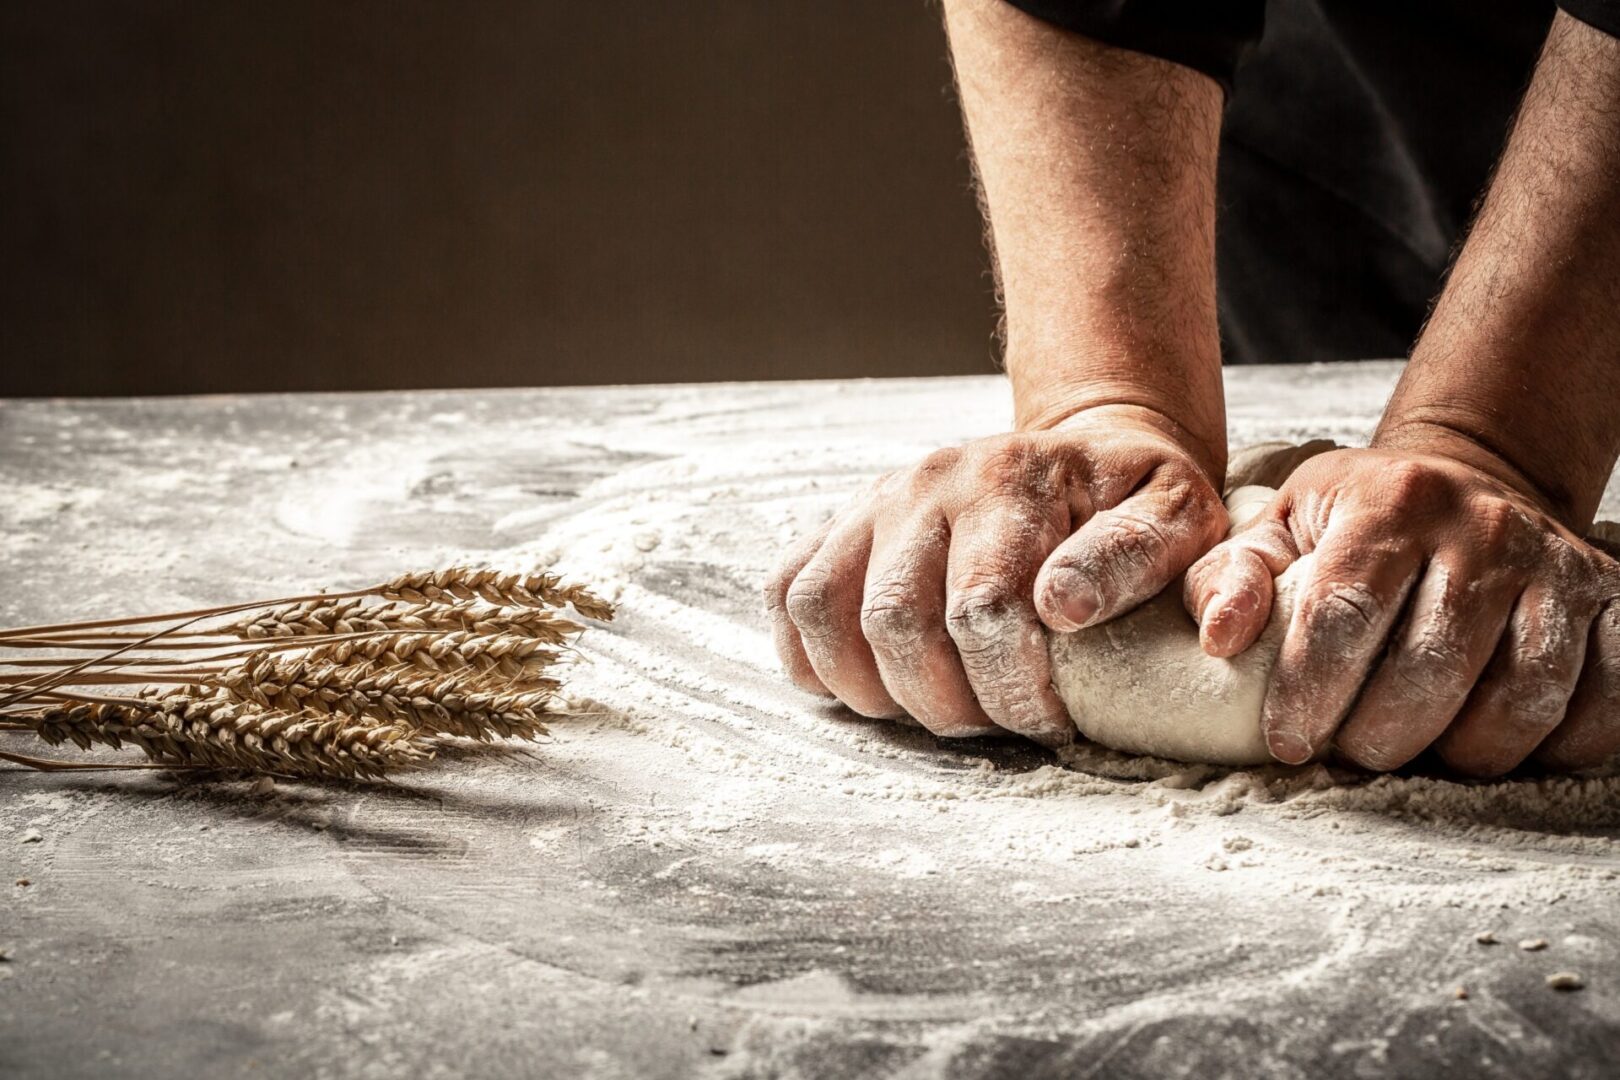 baker's hands kneading bread dough illustrating a metaphor to work with